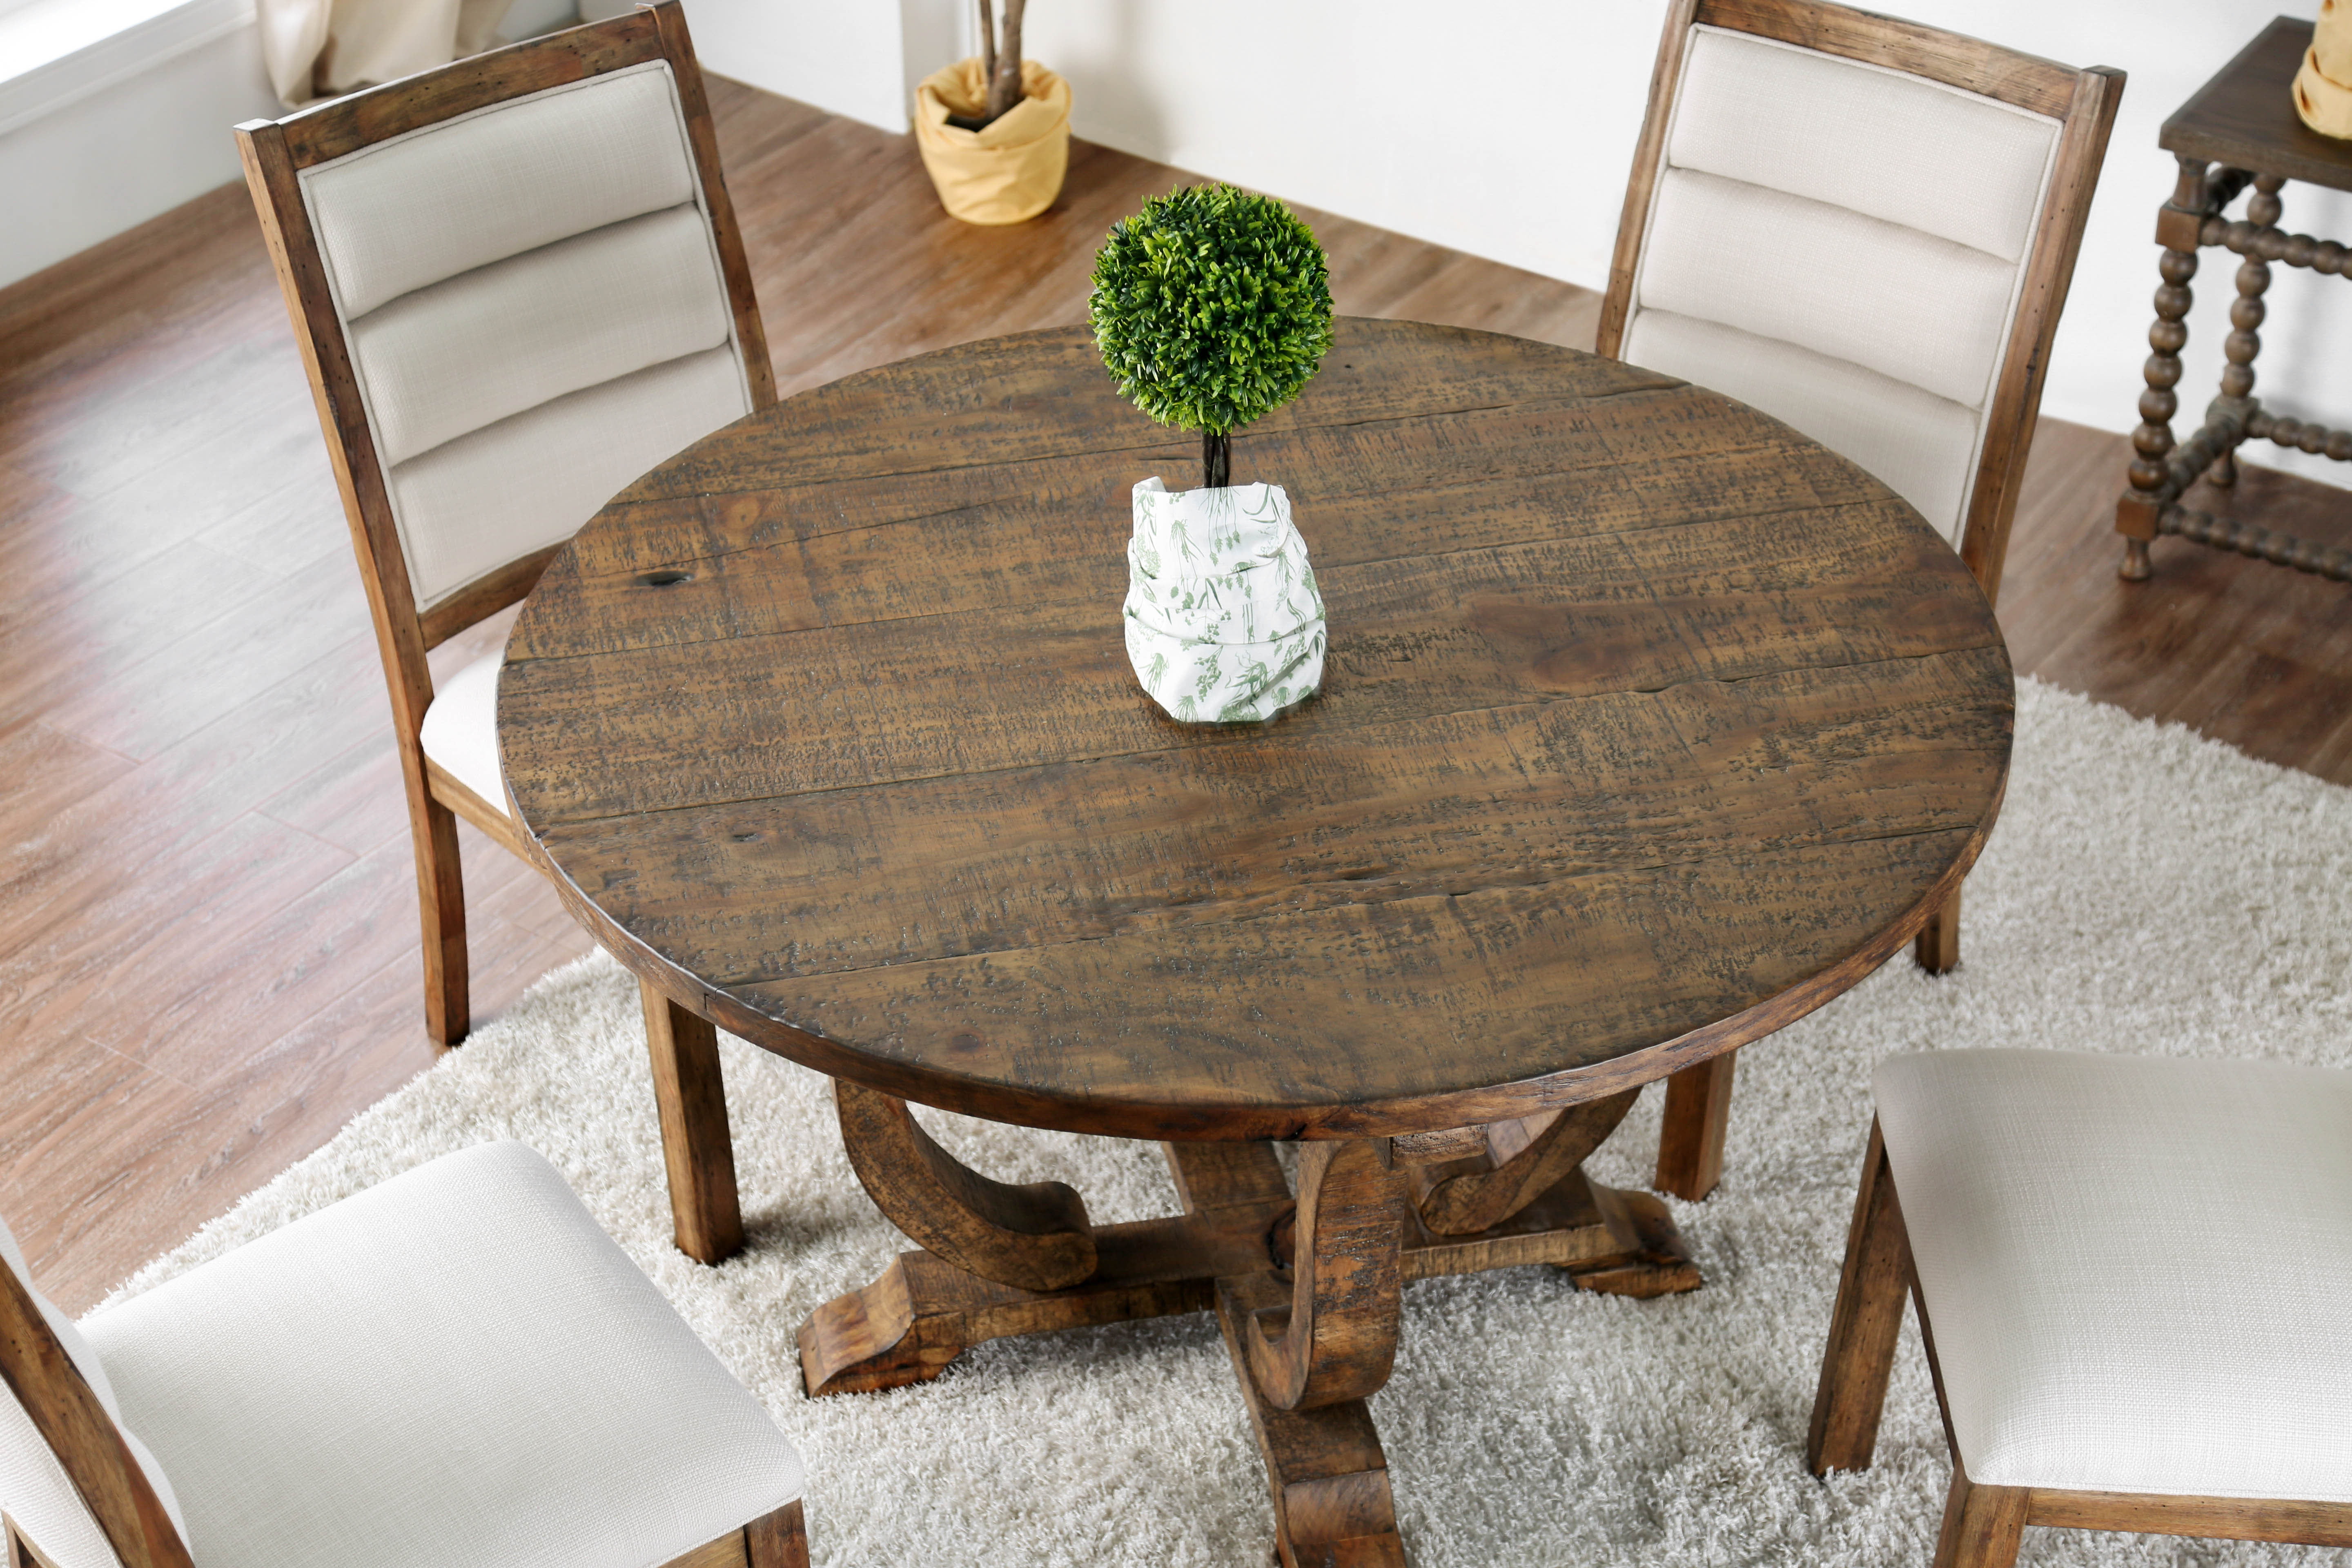  old round wooden table